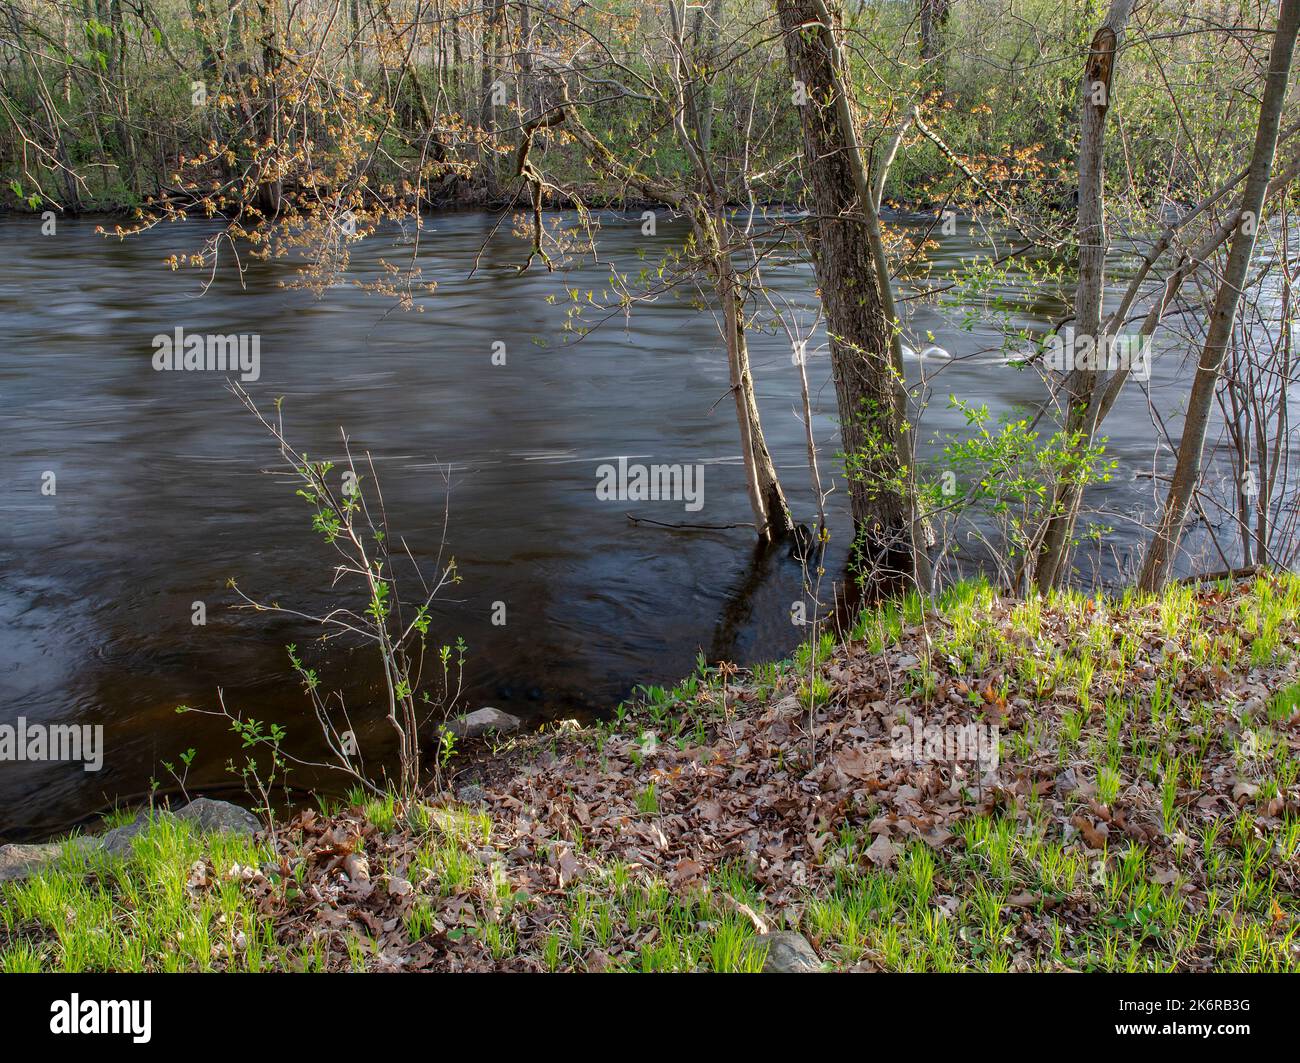 The Huron River is high and over its banks in places after heavy rains but springs keeps progressing, Hudson Mills Metropark, Washtenaw County, MI Stock Photo